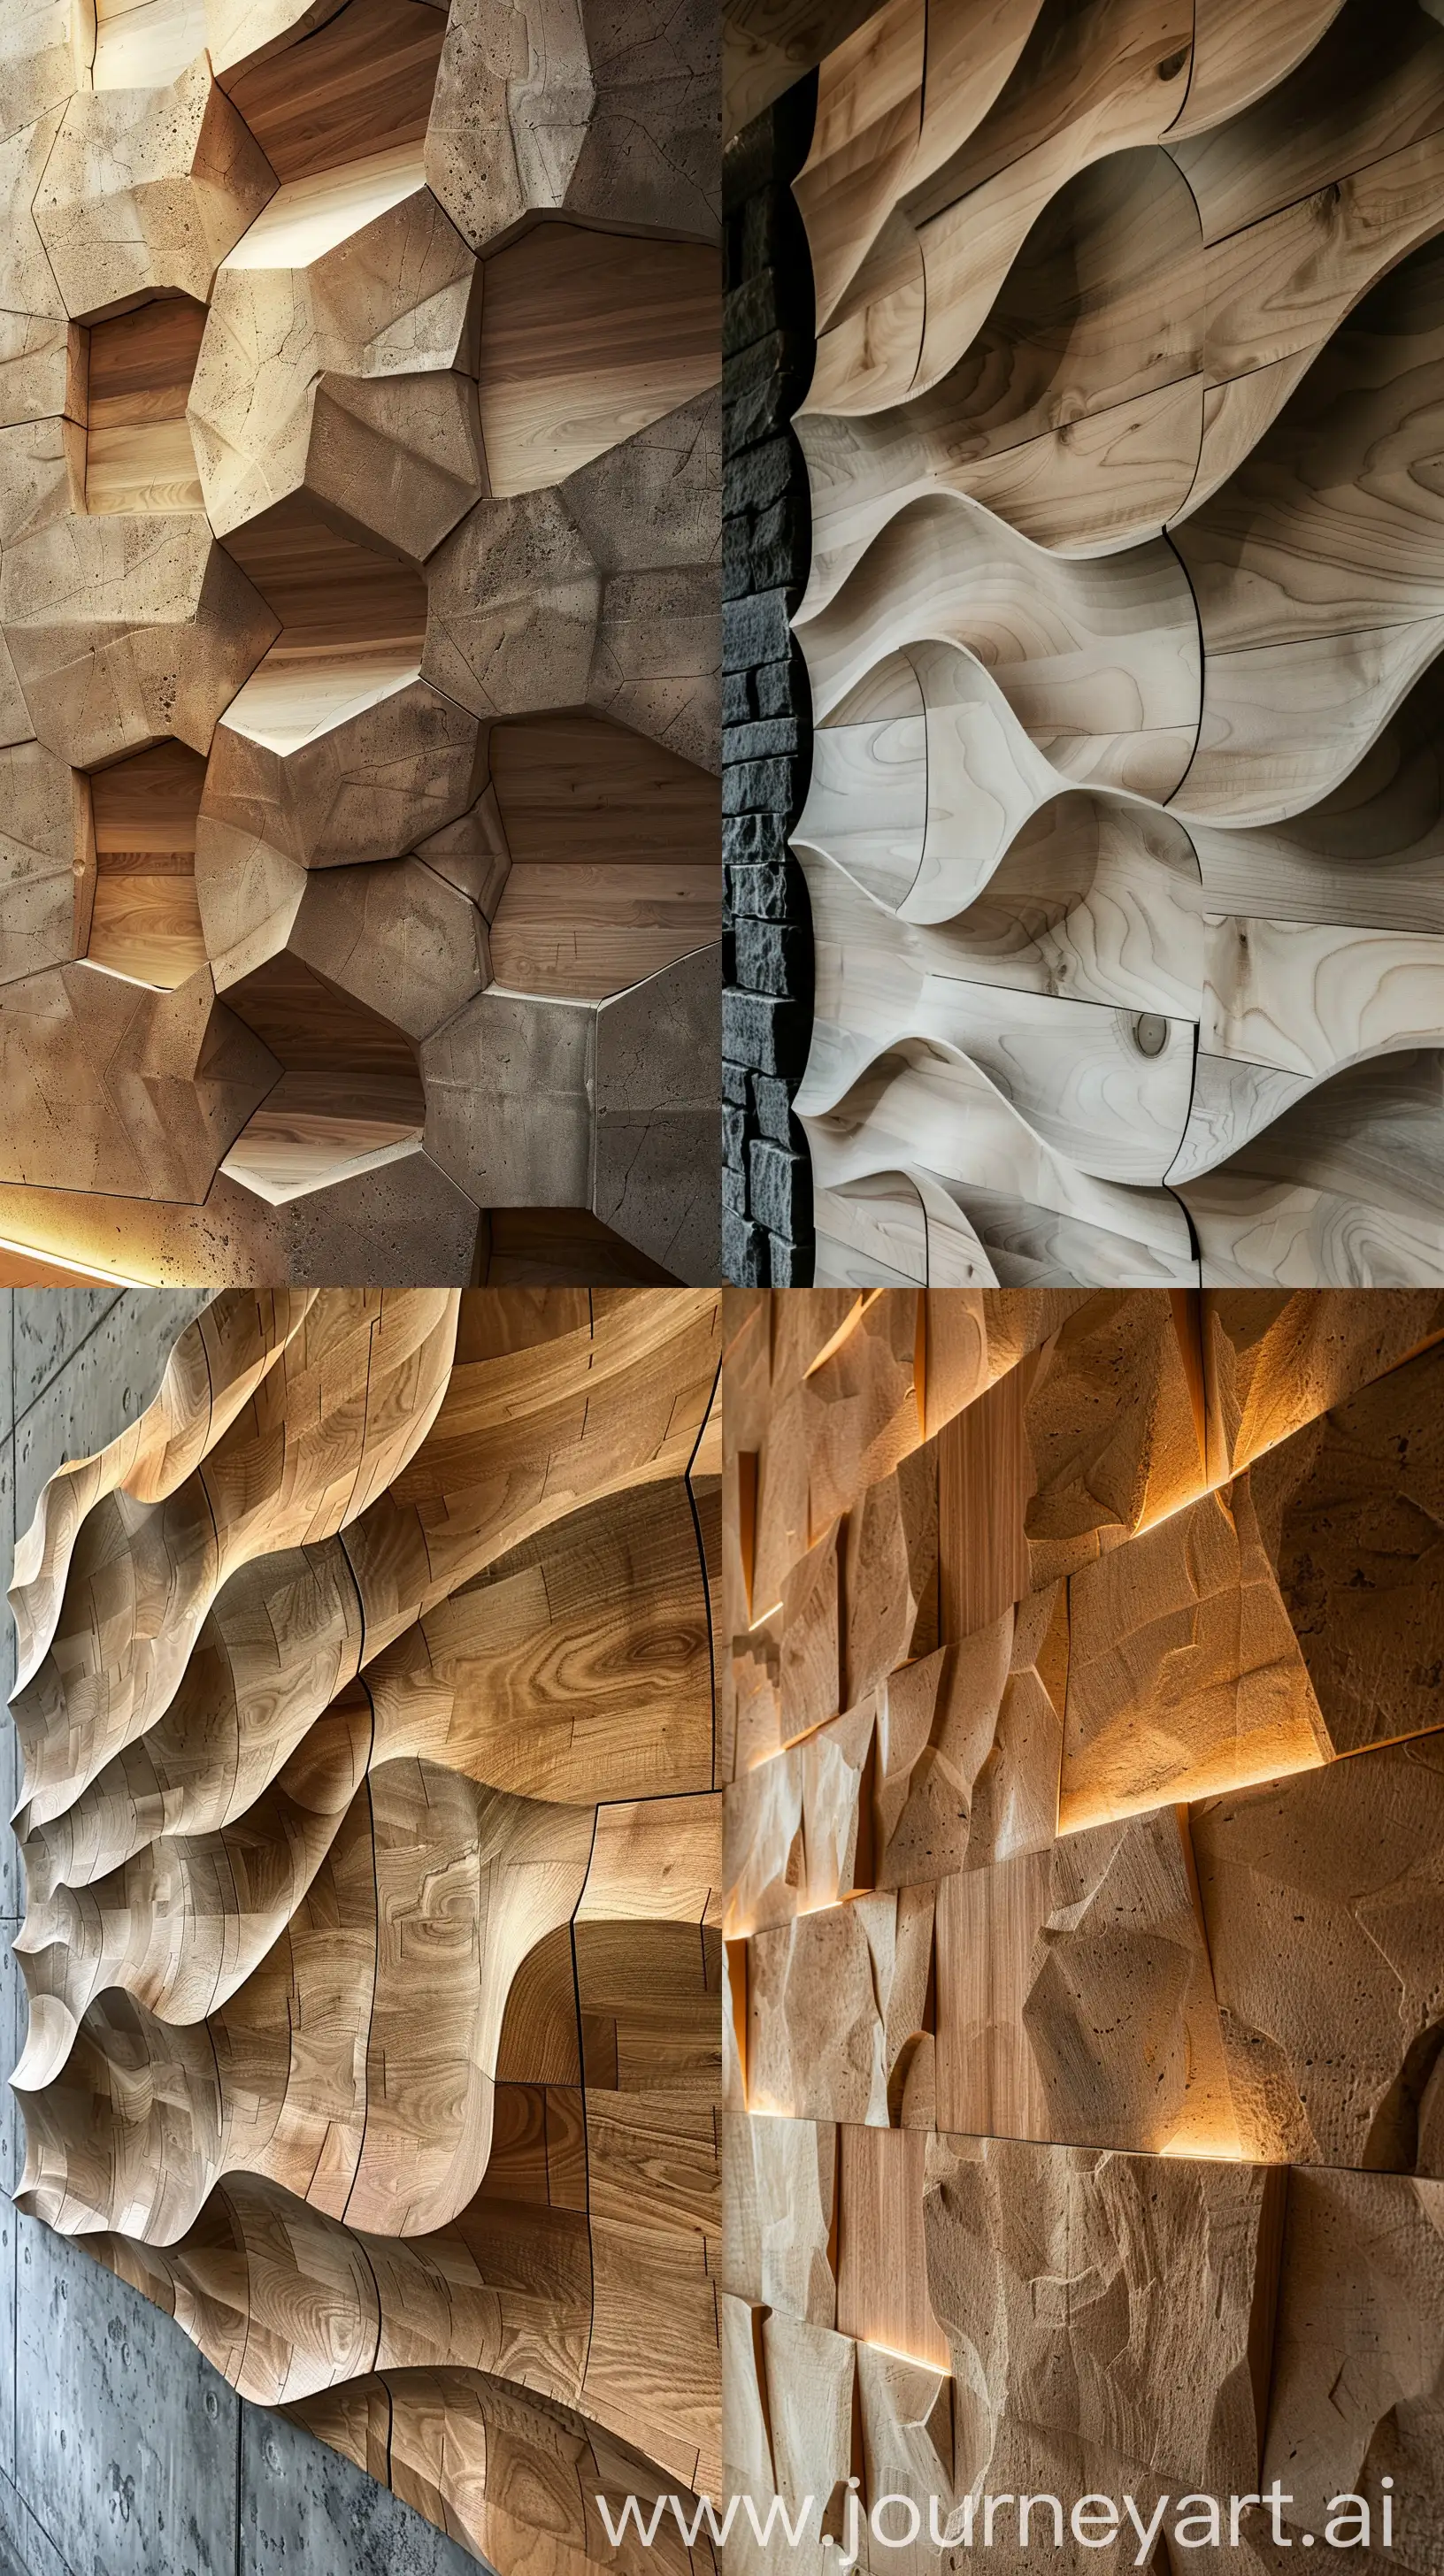 Photo of the wall of the science and technology center area designed with computational architecture, modern, wood, stone; top view horizontal close-up image in the restaurant --ar 9:16 --v 6.0